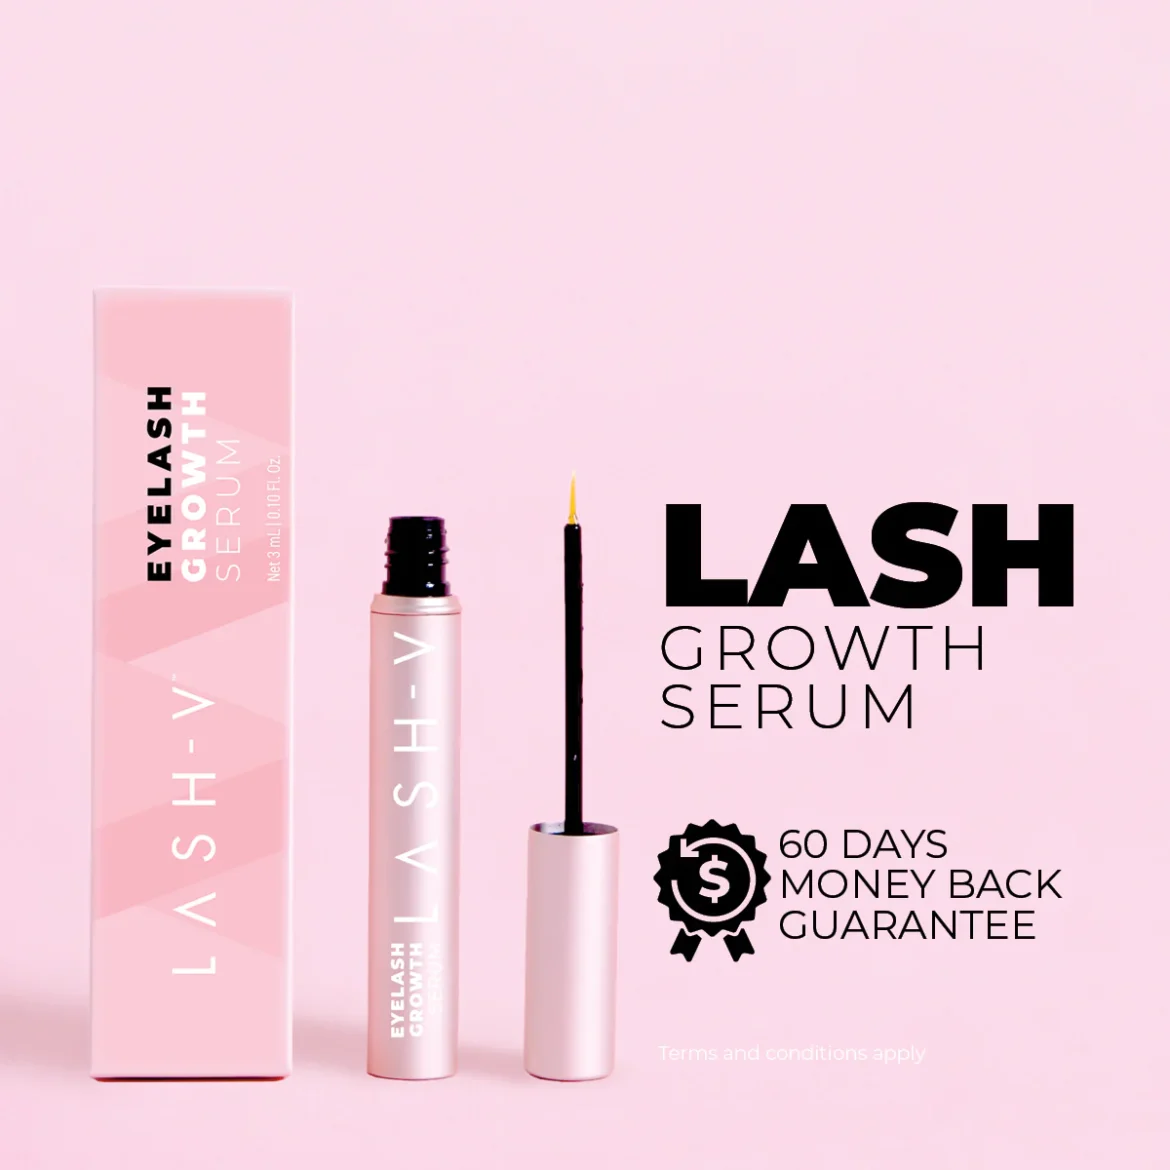 How To Get a Perfect Lash Lift With a Lash Lift Kit?